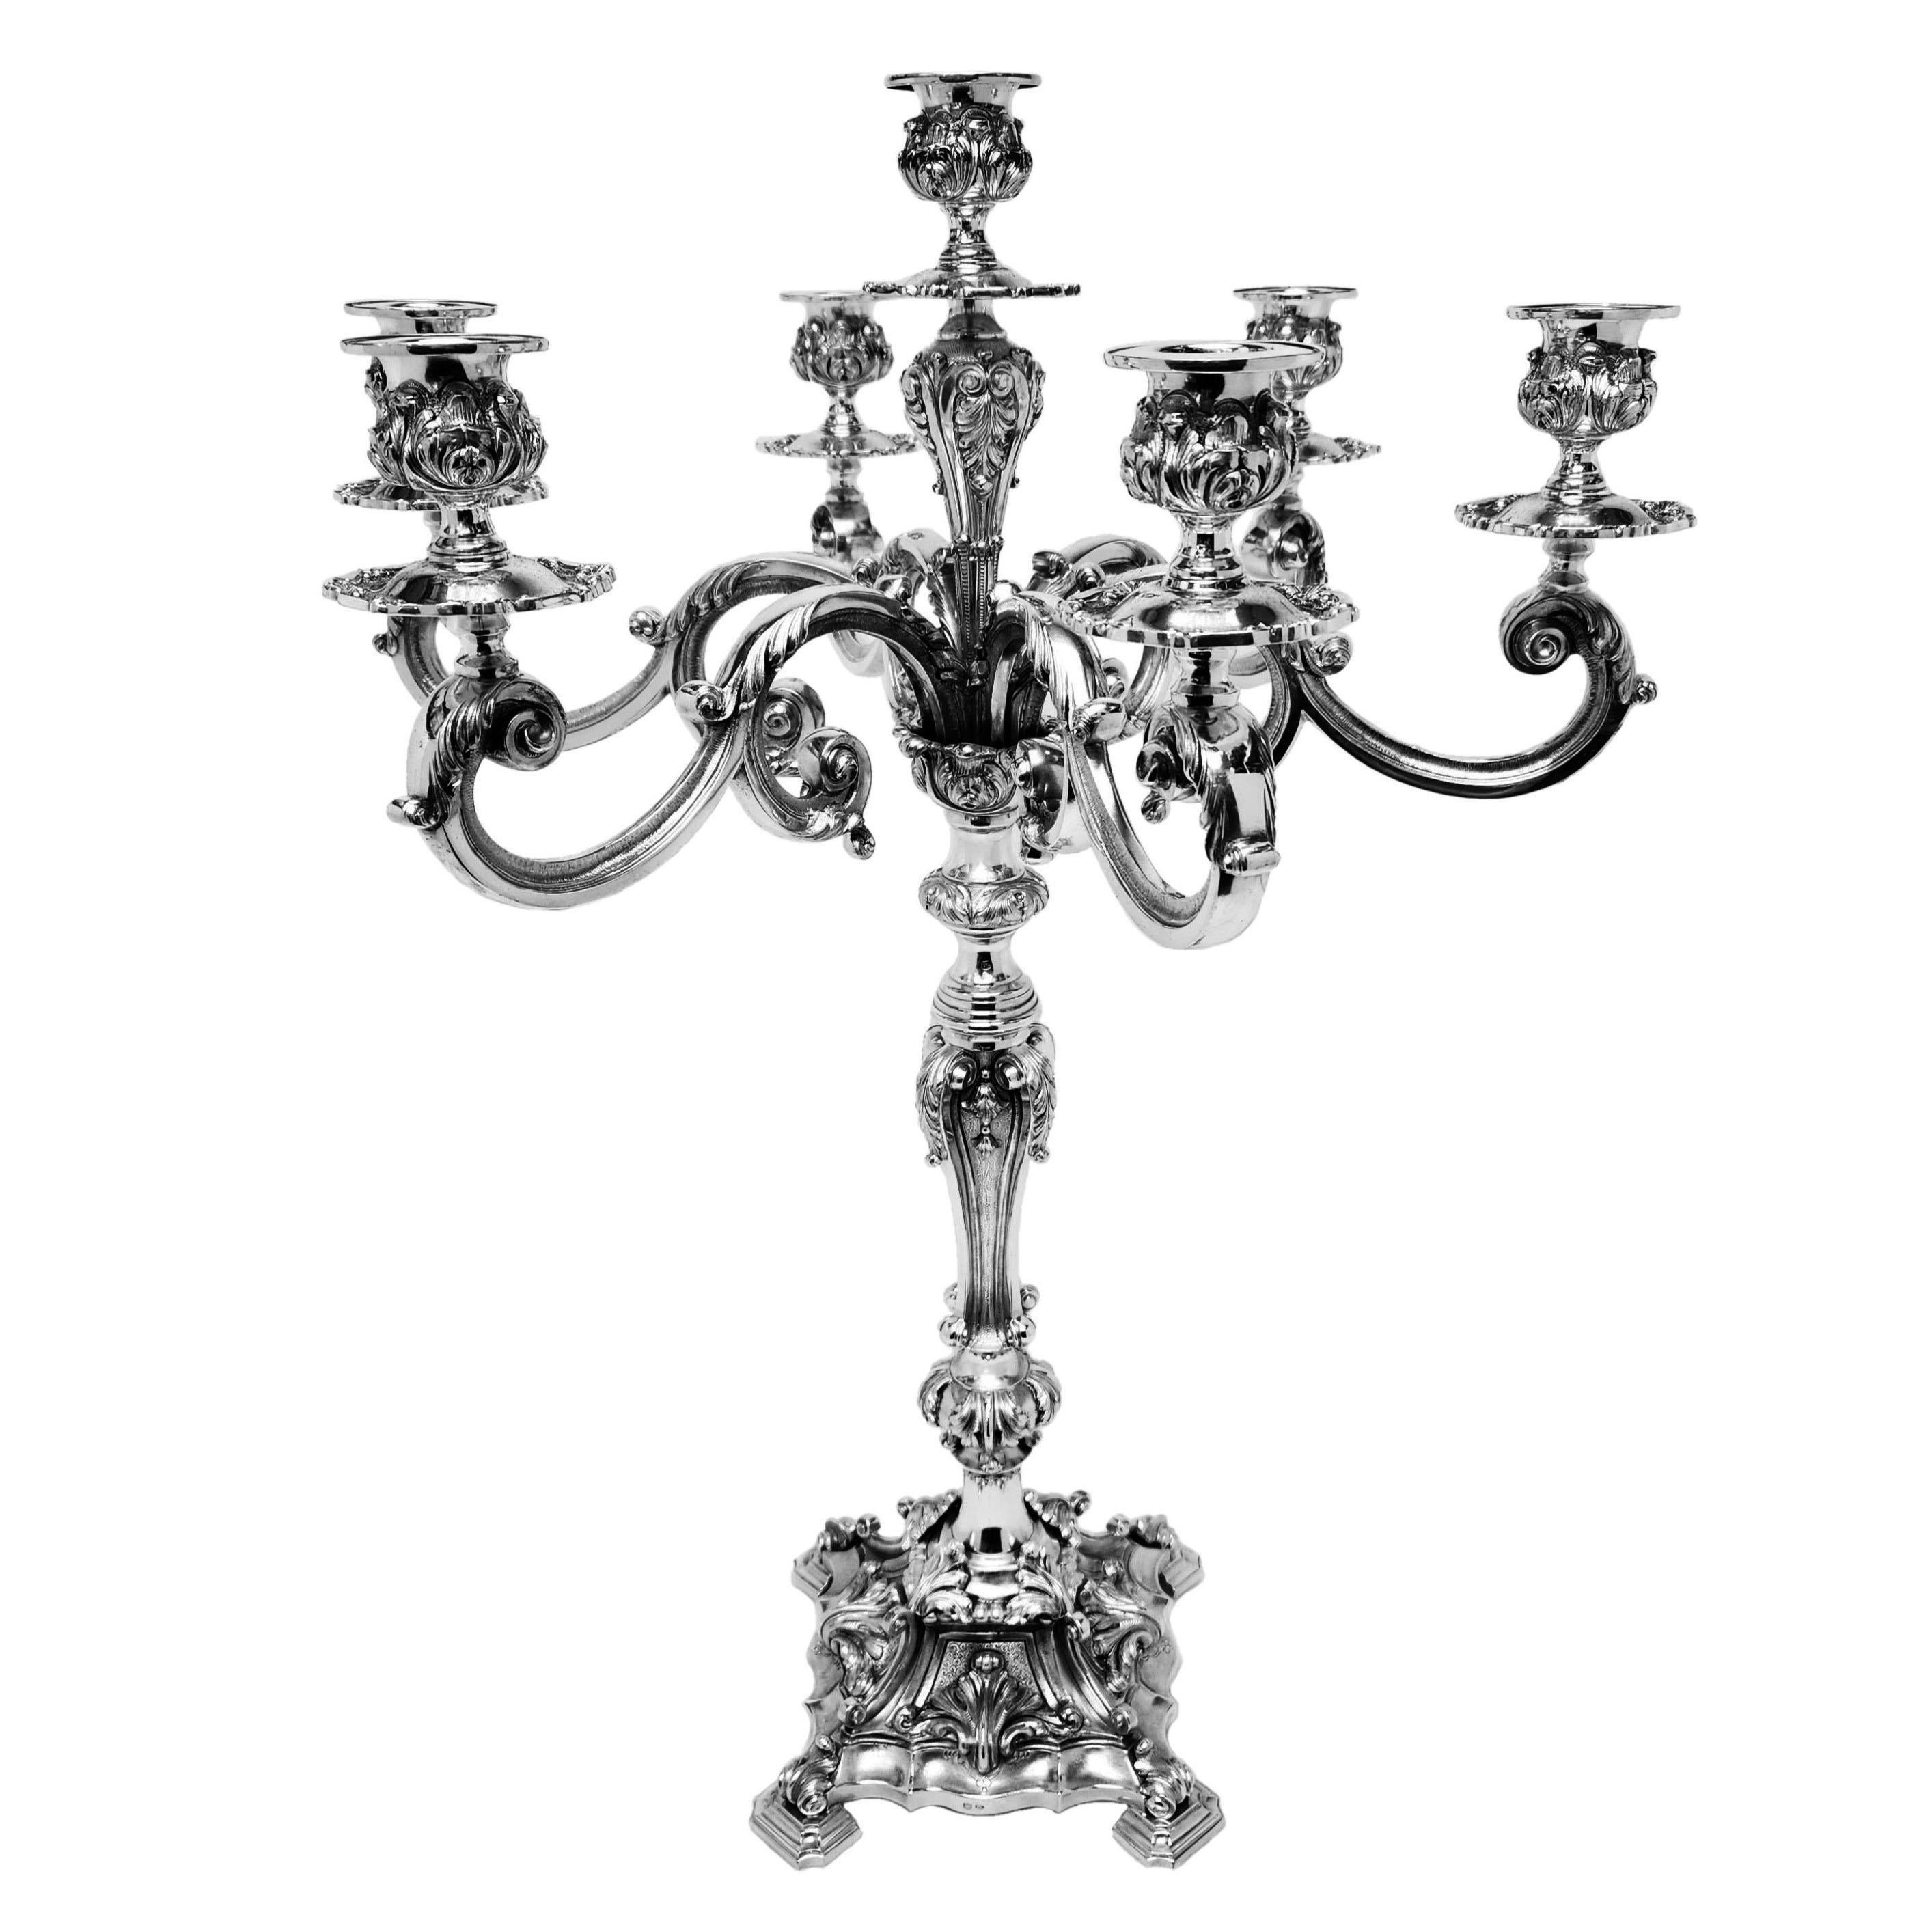 A pair of magnificent vintage Silver Candelabra with 6 acanthus leaf embellished branches around a central candleholder. The Candelabra each stand on shaped square bases decorated with shell and scroll designs and standing on four feet.

Made in